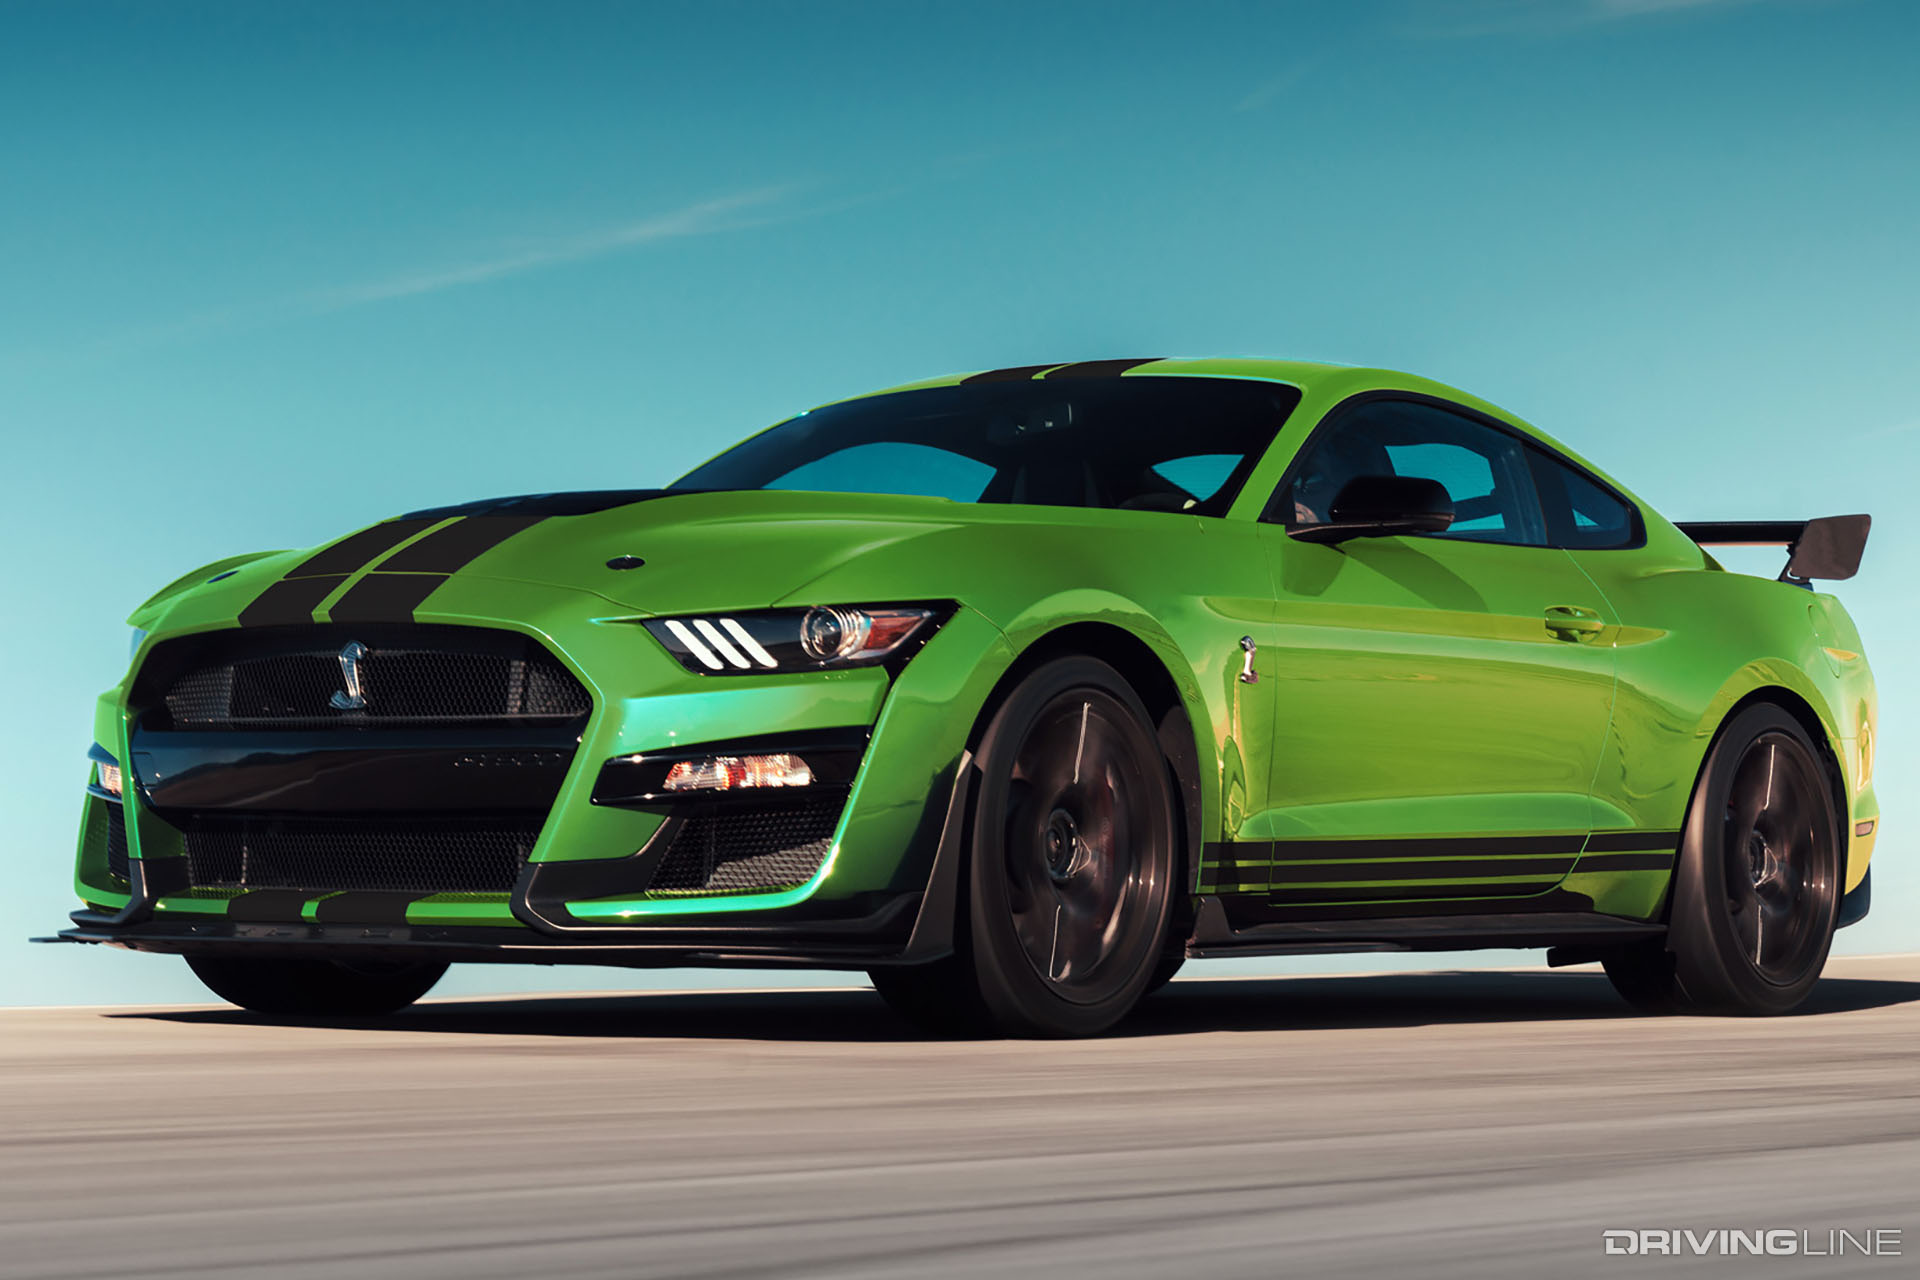 760HP, 625 LB-FT: Specs for 2020 Shelby GT500 | DrivingLine